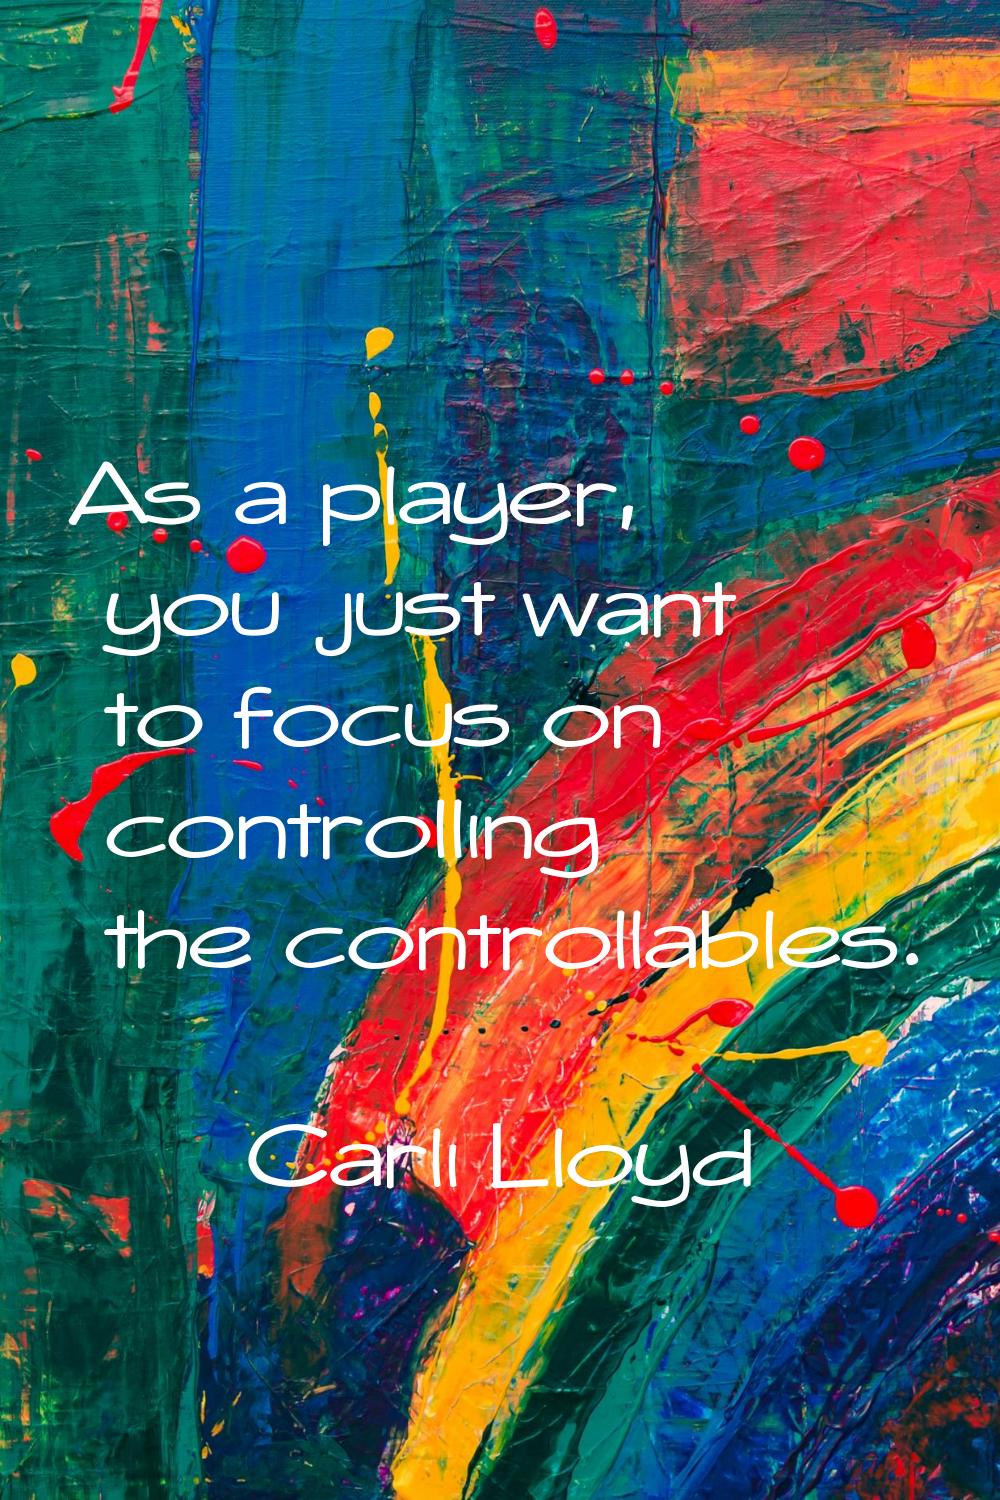 As a player, you just want to focus on controlling the controllables.